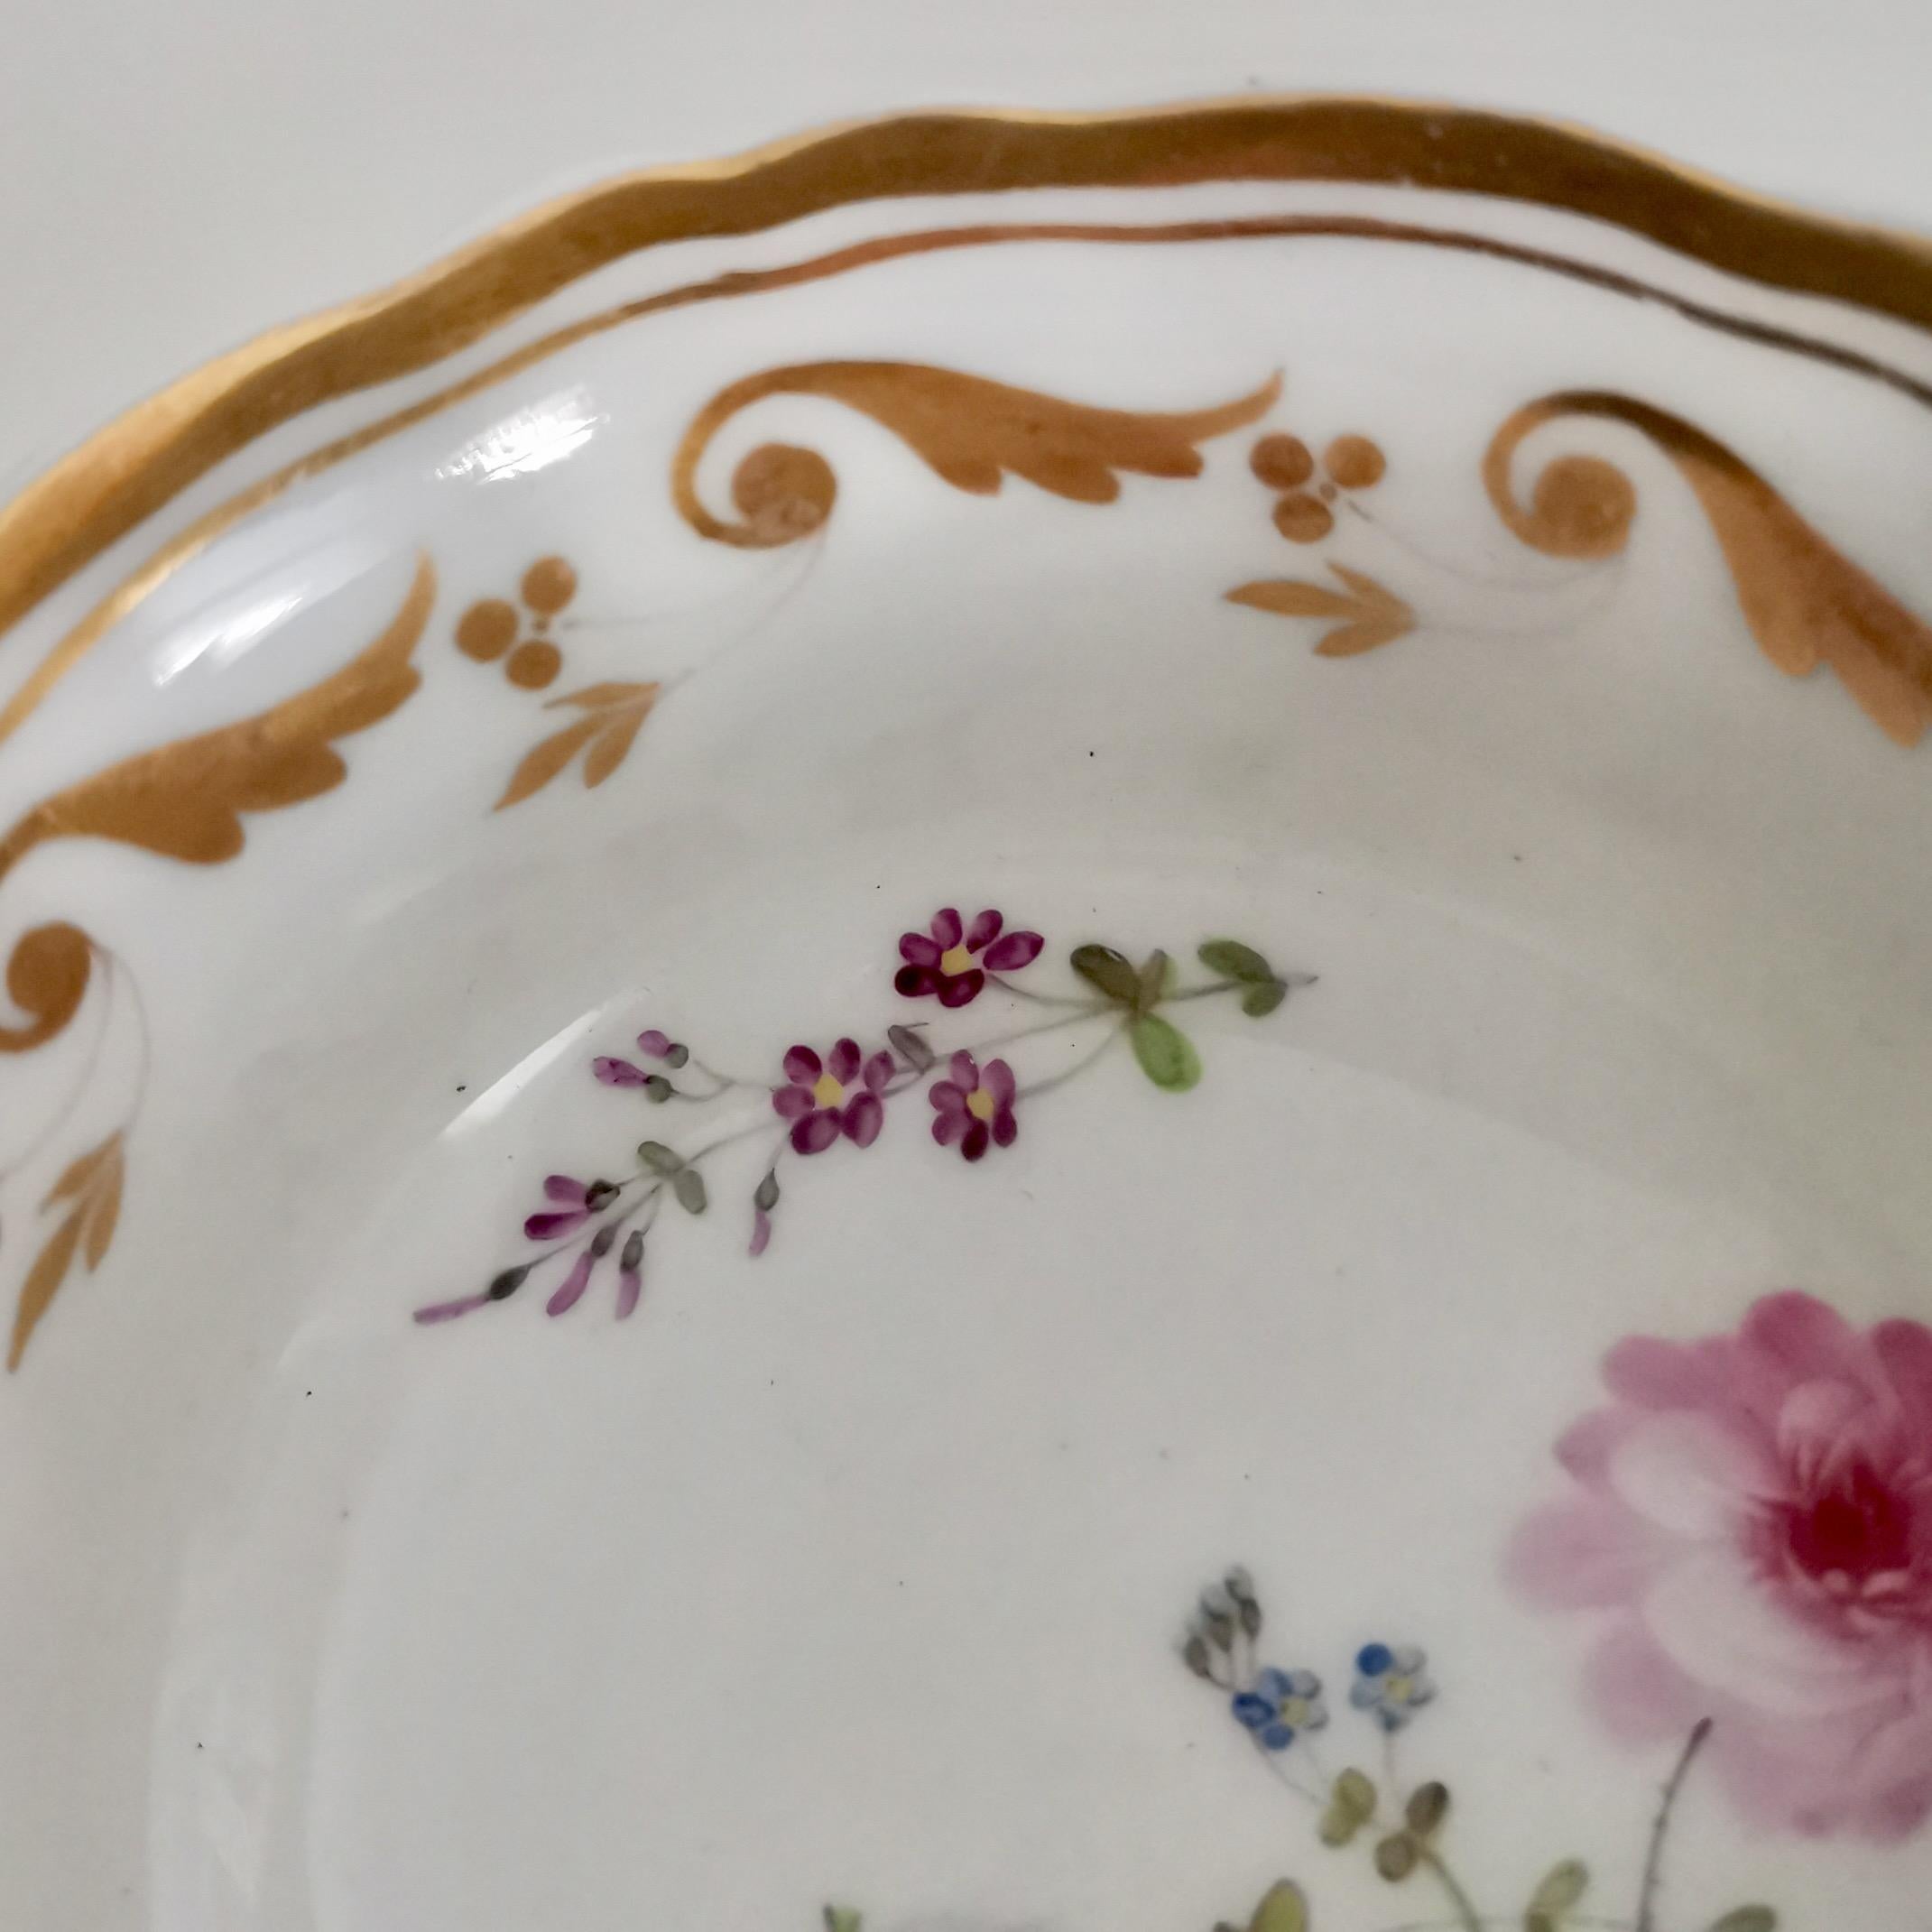 Yates Porcelain Teacup, White with Gilt and Flowers, Regency, circa 1825 5